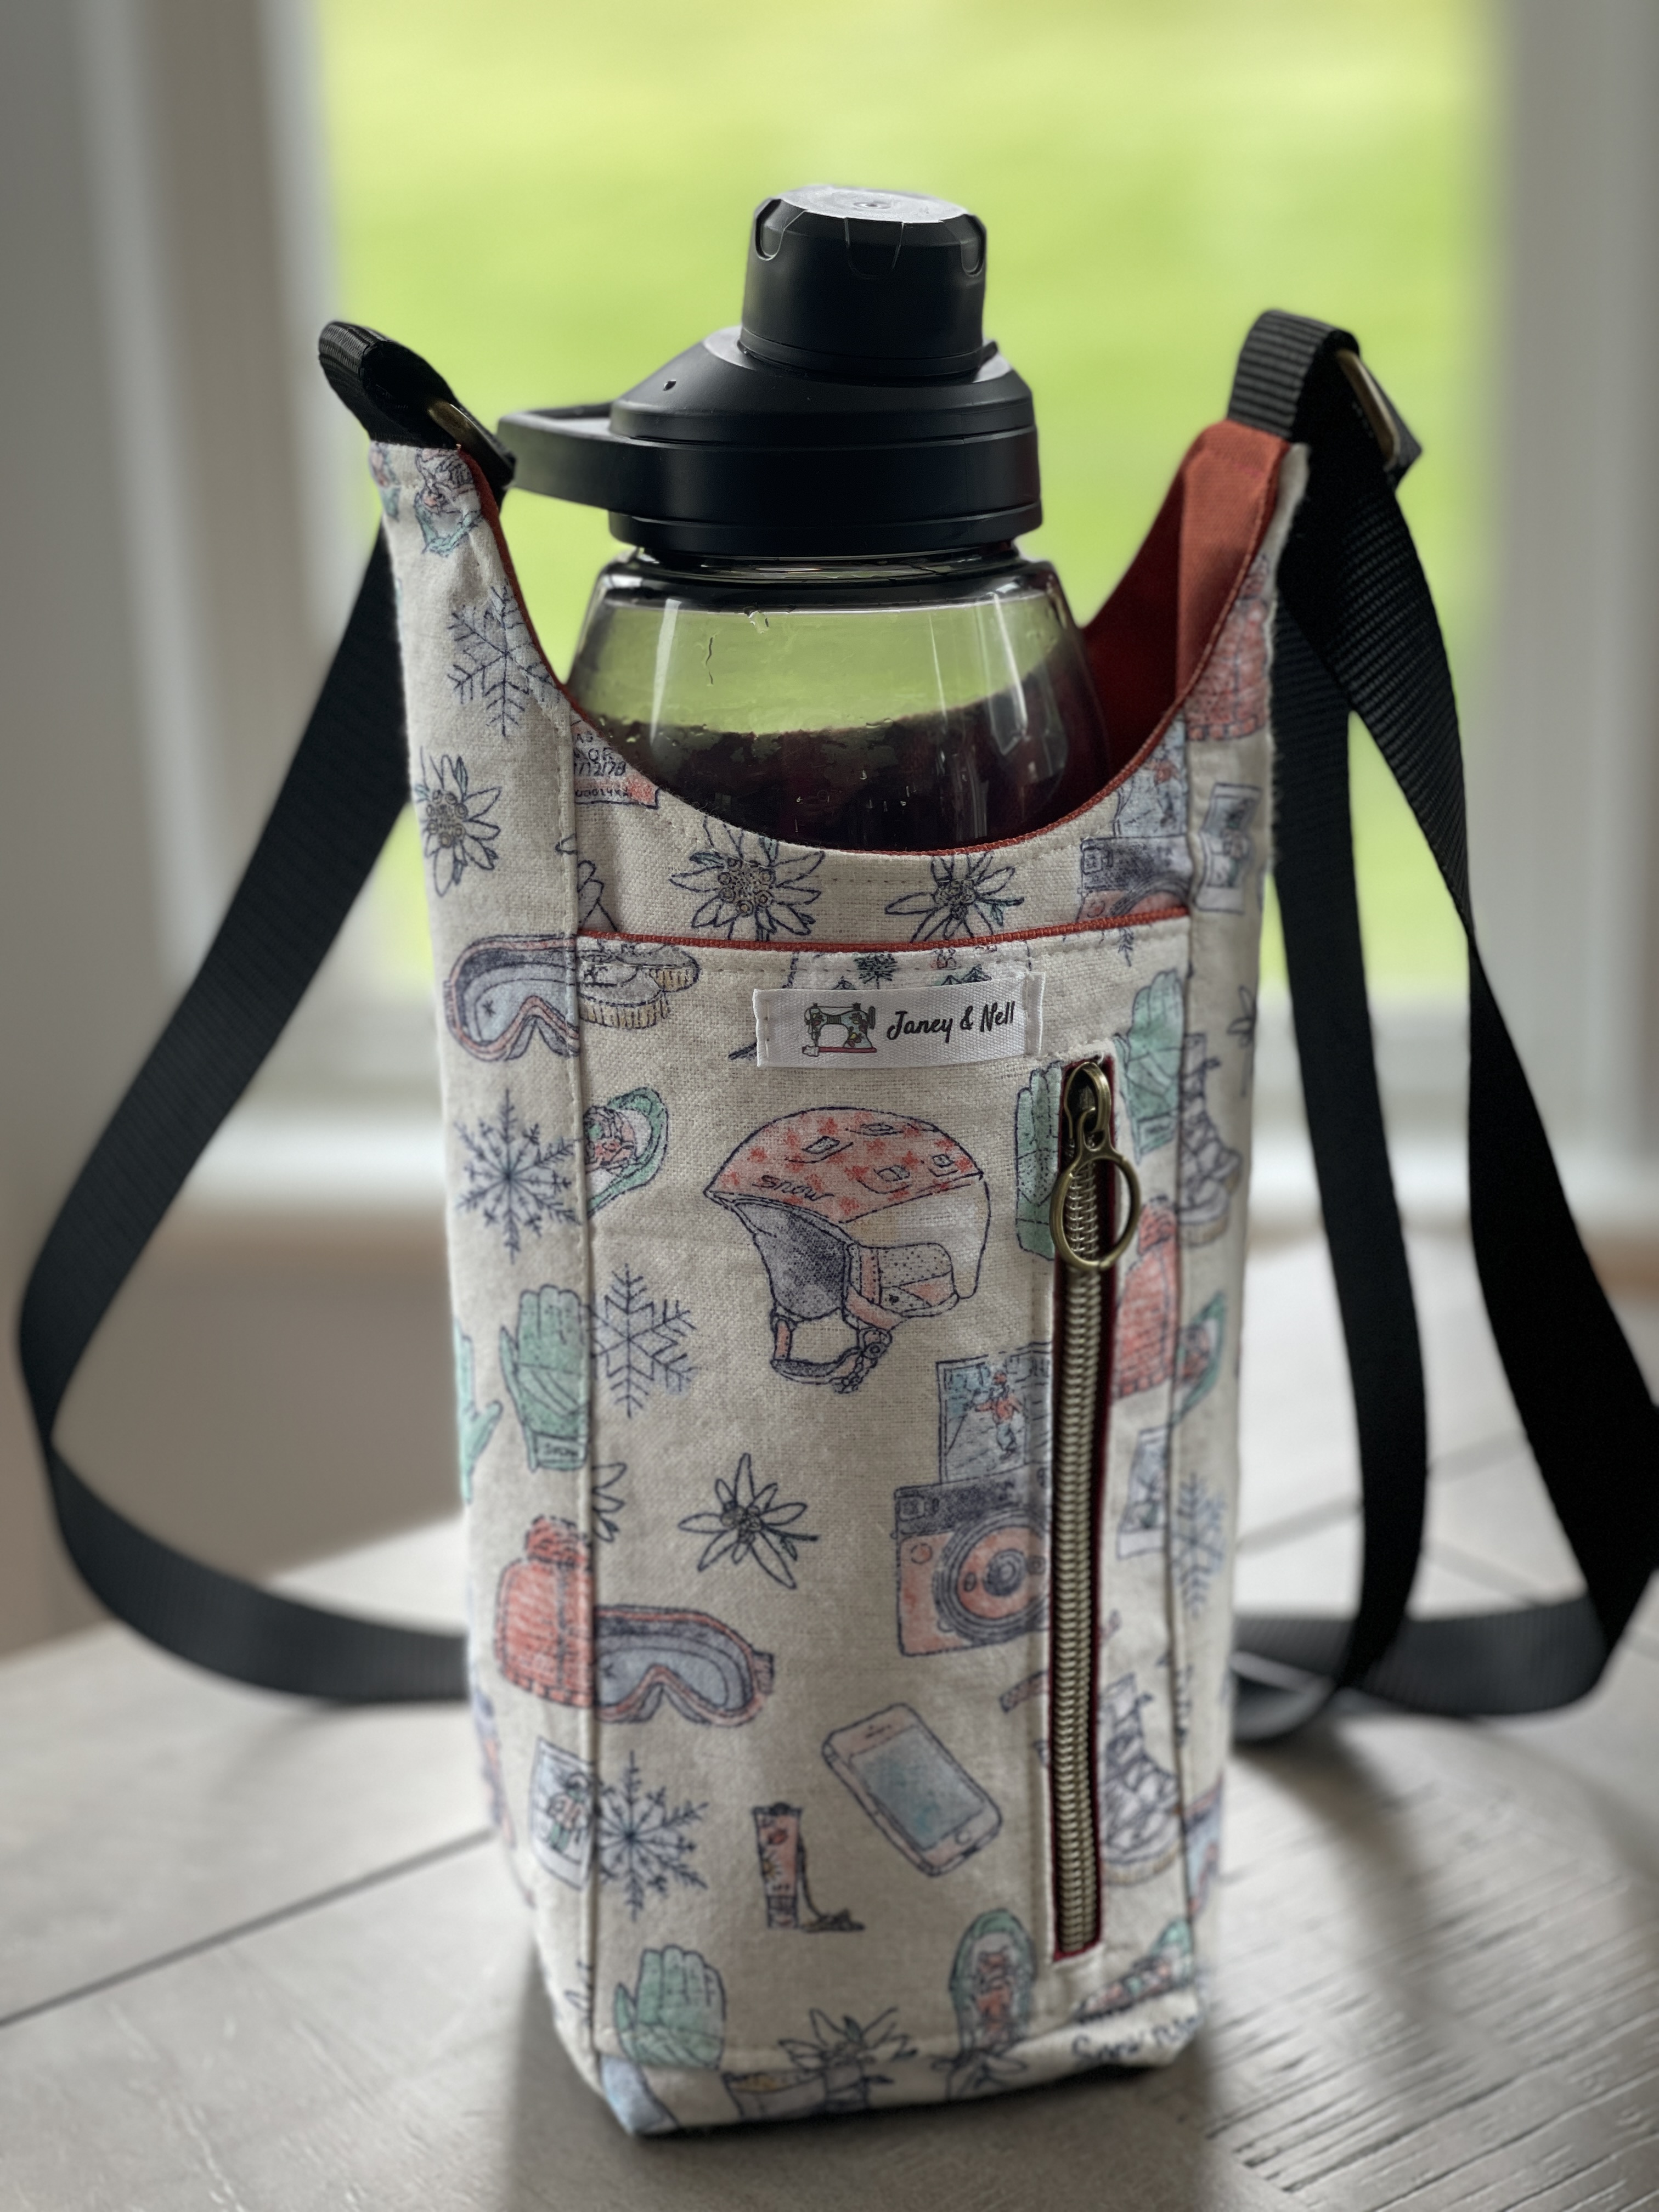 Sometimes you just need a purse. For your bottle. Hot girl walk/hike g, blogilates water bottle sling